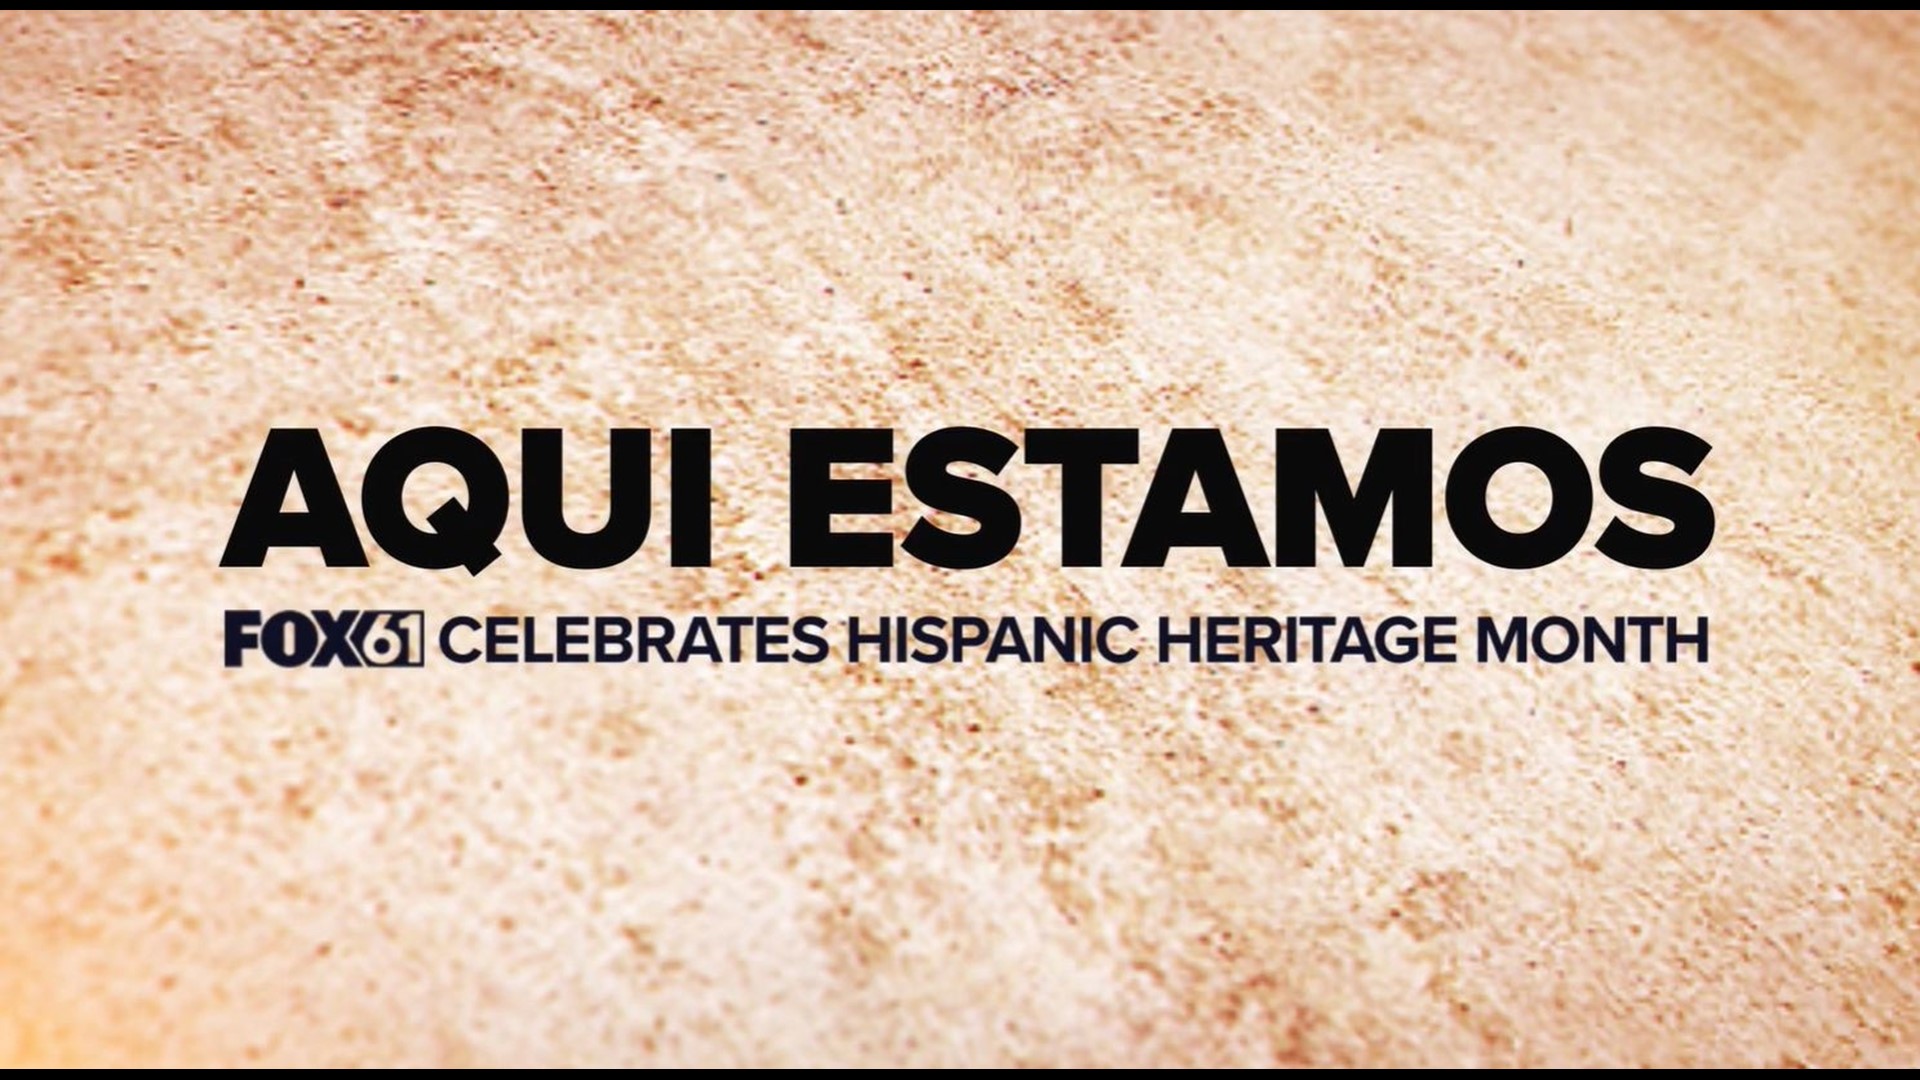 Fox61 in Connecticut sheds light on the contributions the Latinx community has made to the state, and shares stories of their culture during Hispanic Heritage Month.